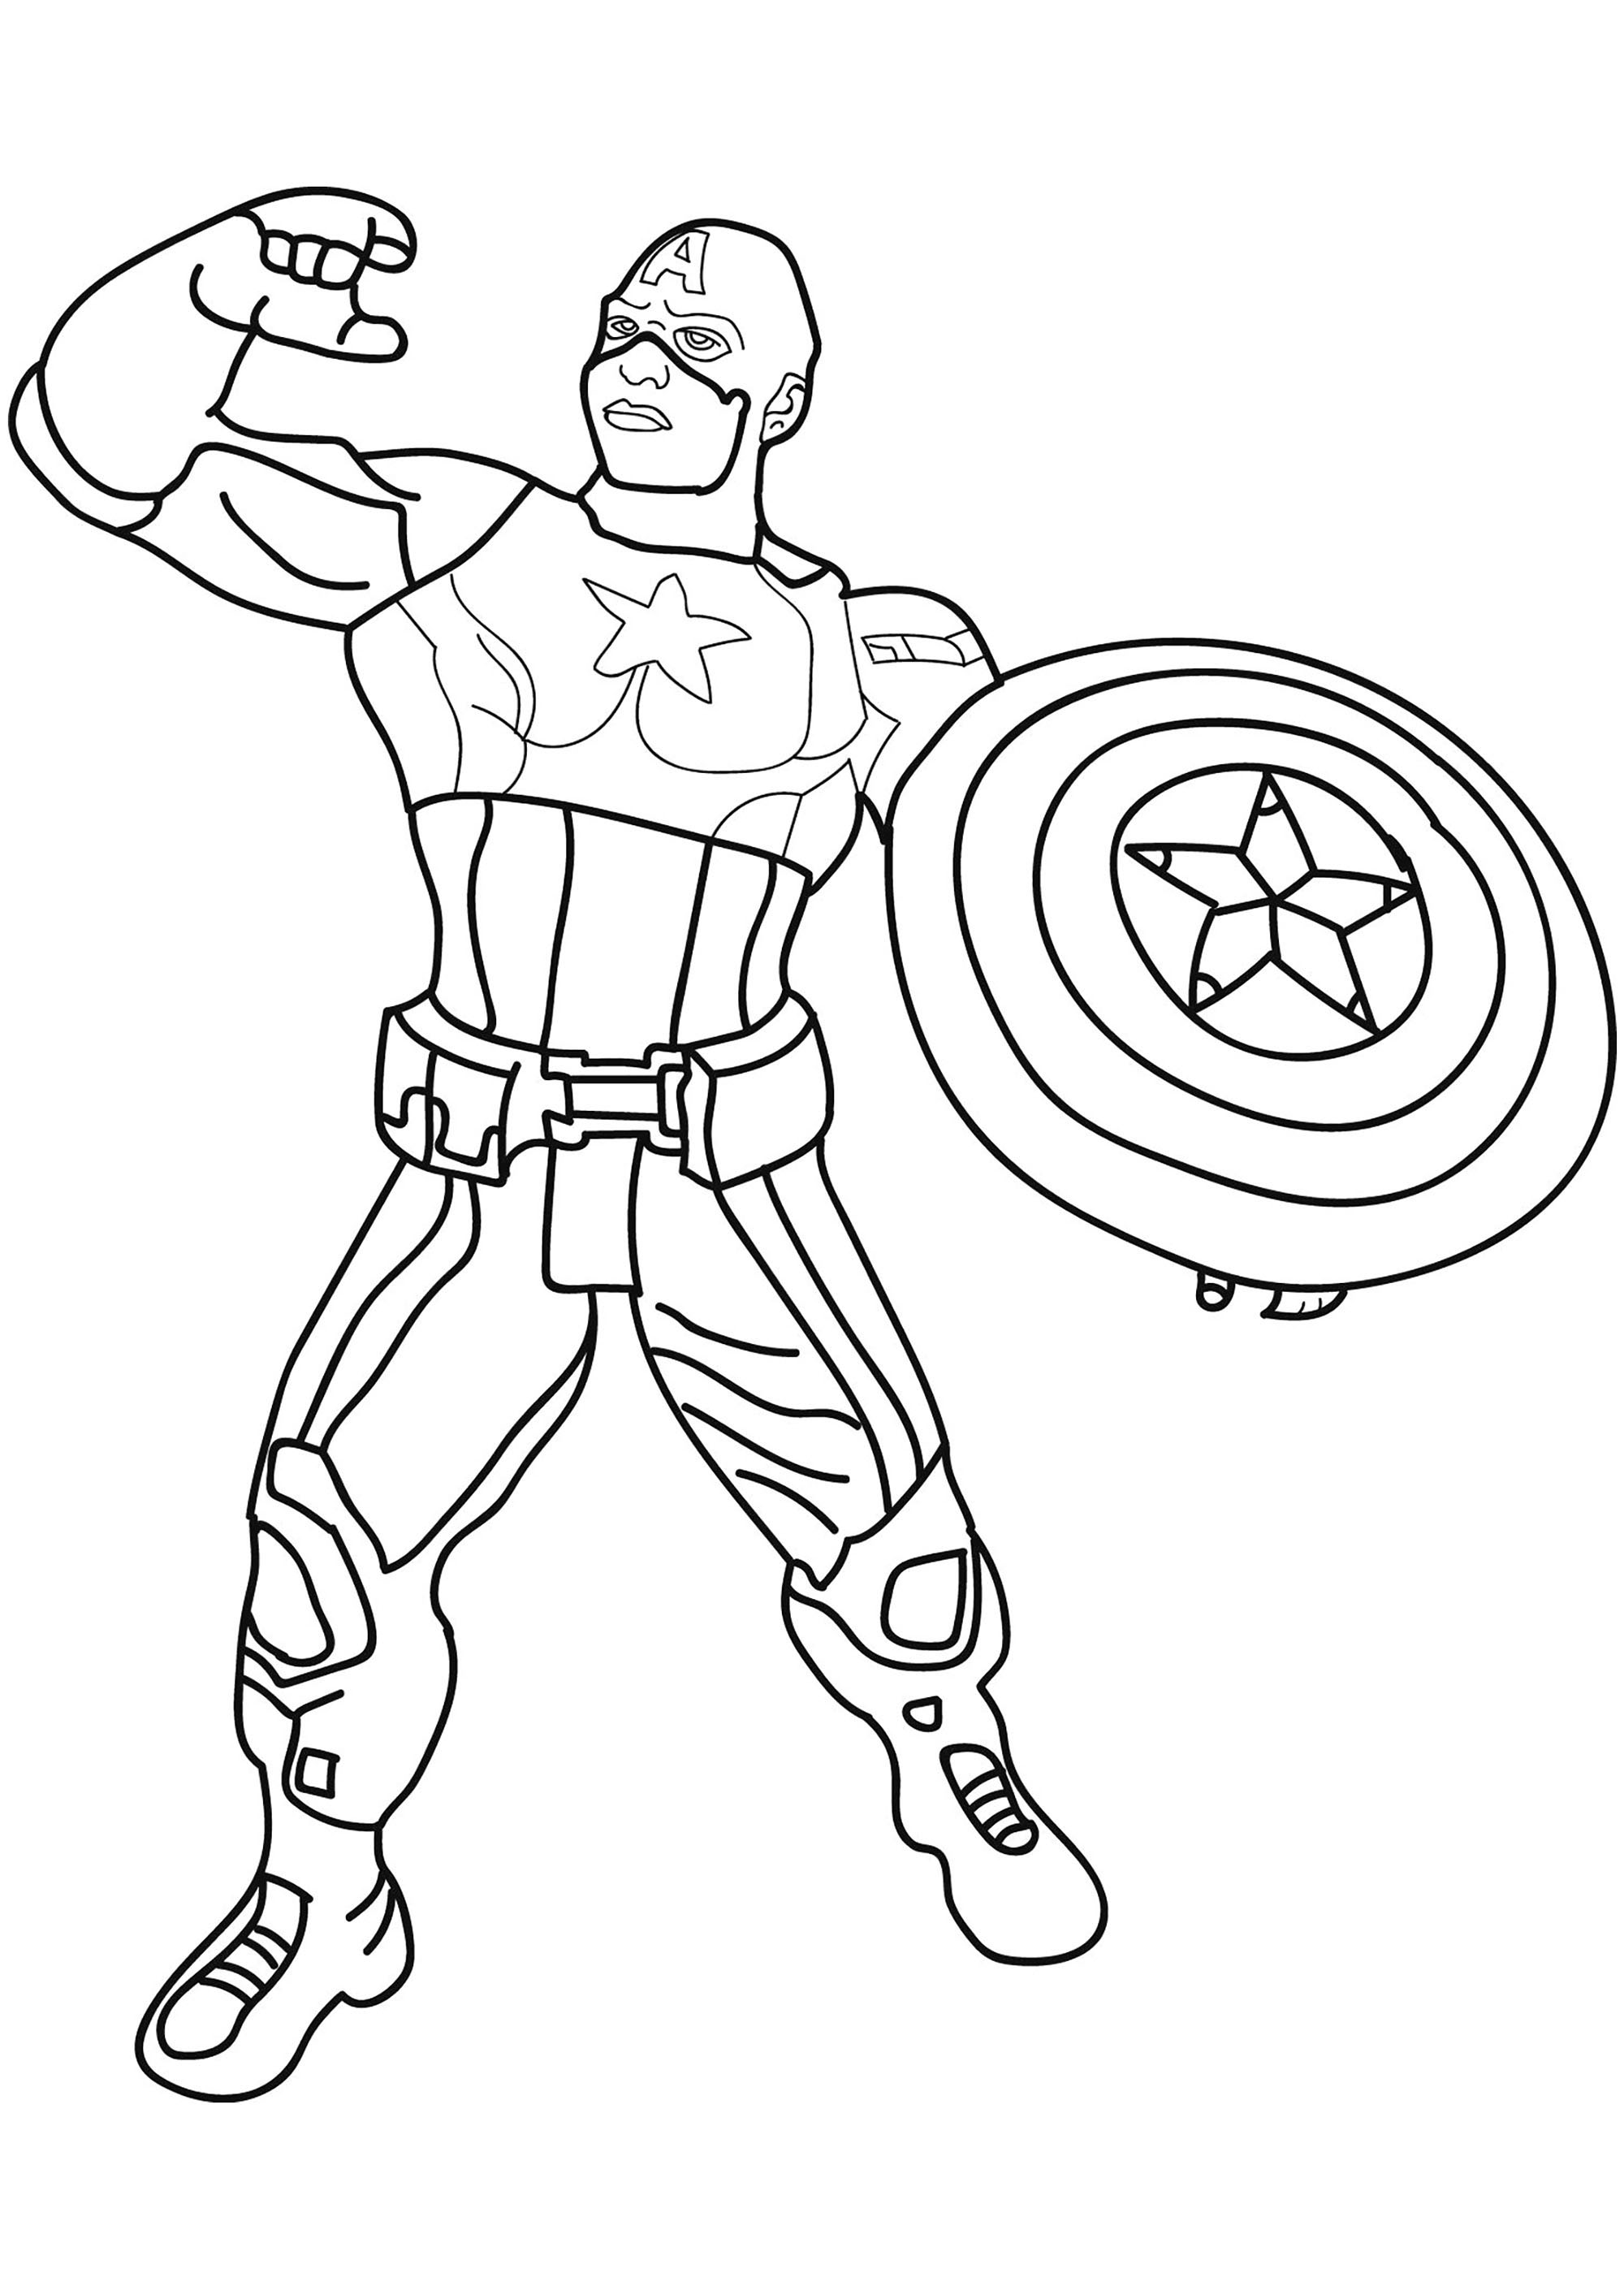 printable-coloring-pages-for-child